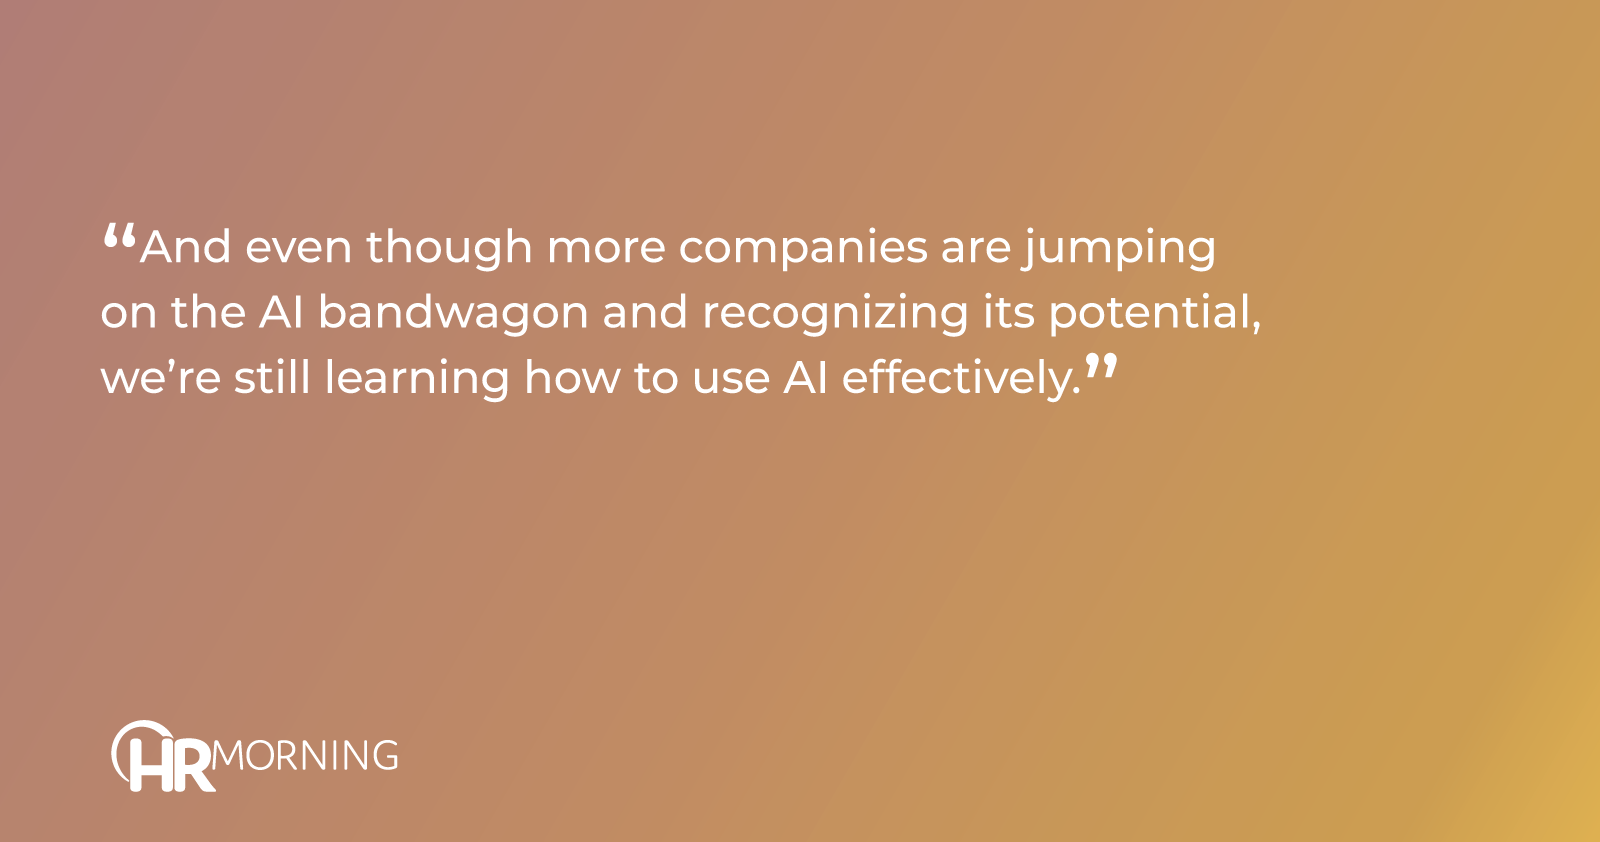 "And even though more companies are jumping on the AI bandwagon and recognizing its potential, we’re still learning how to use AI effectively."